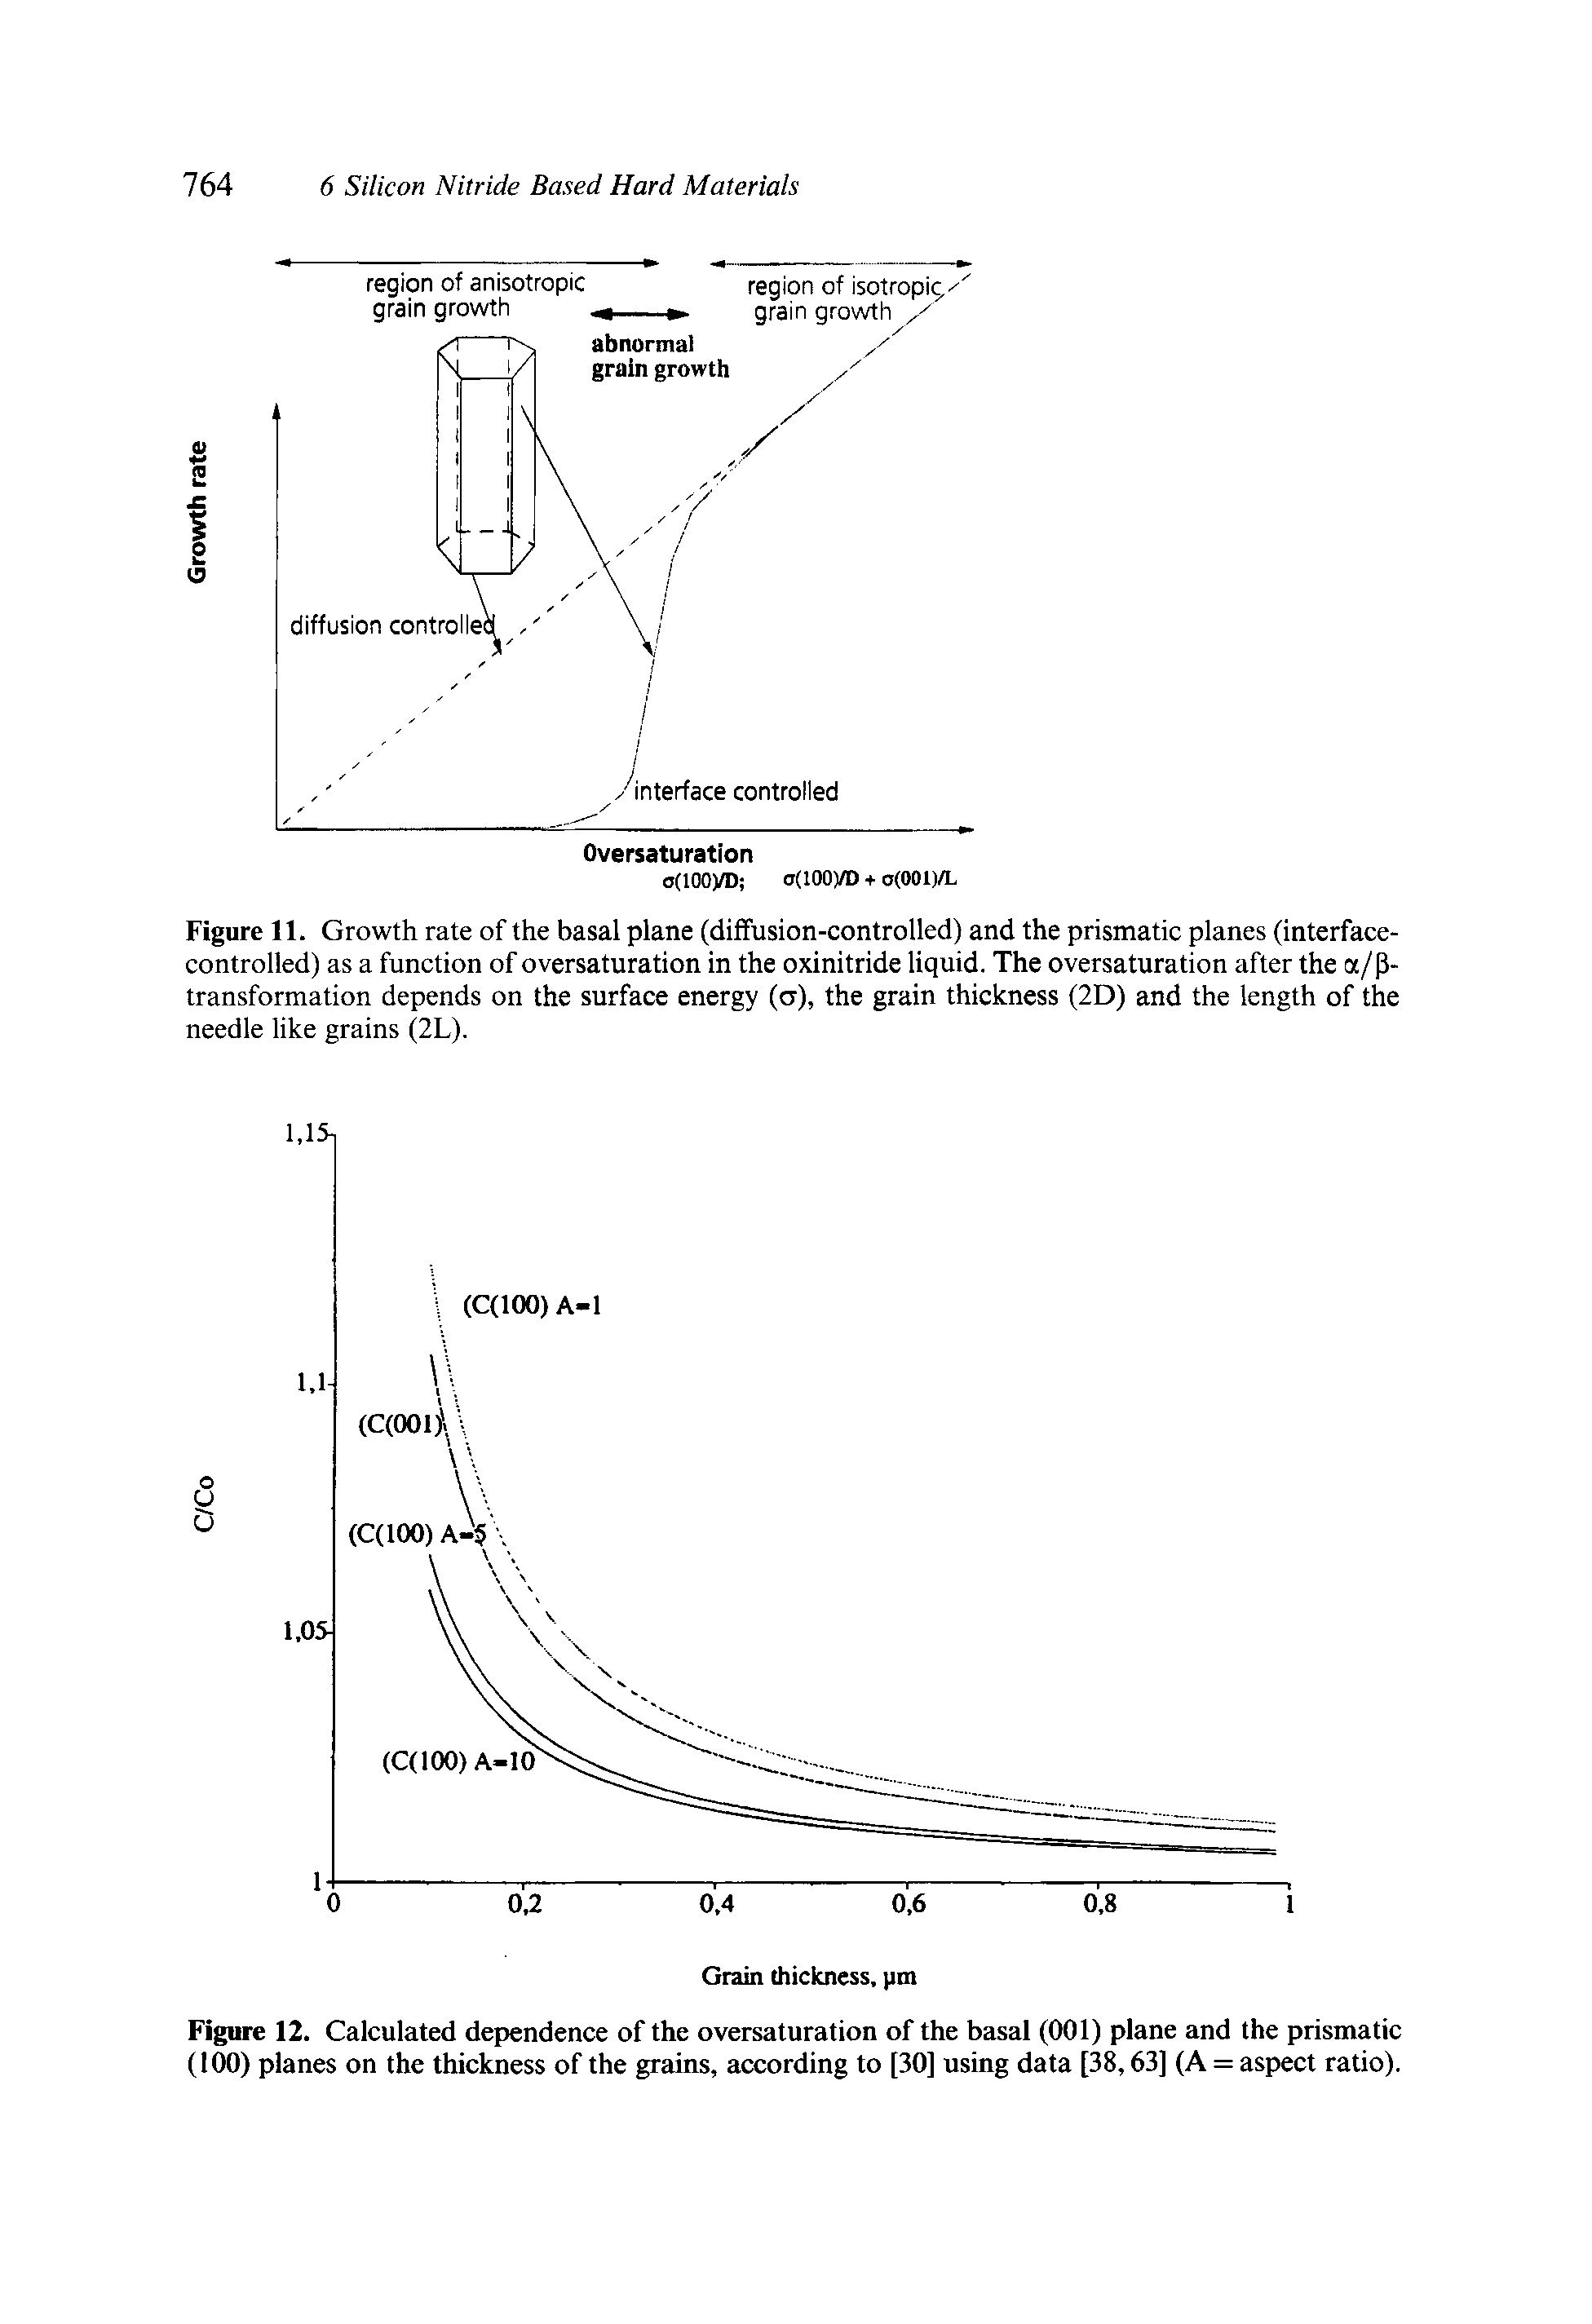 Figure 11. Growth rate of the basal plane (diffusion-controlled) and the prismatic planes (interface-controlled) as a function of oversaturation in the oxinitride liquid. The oversaturation after the a/P-transformation depends on the surface energy (a), the grain thickness (2D) and the length of the needle like grains (2L).